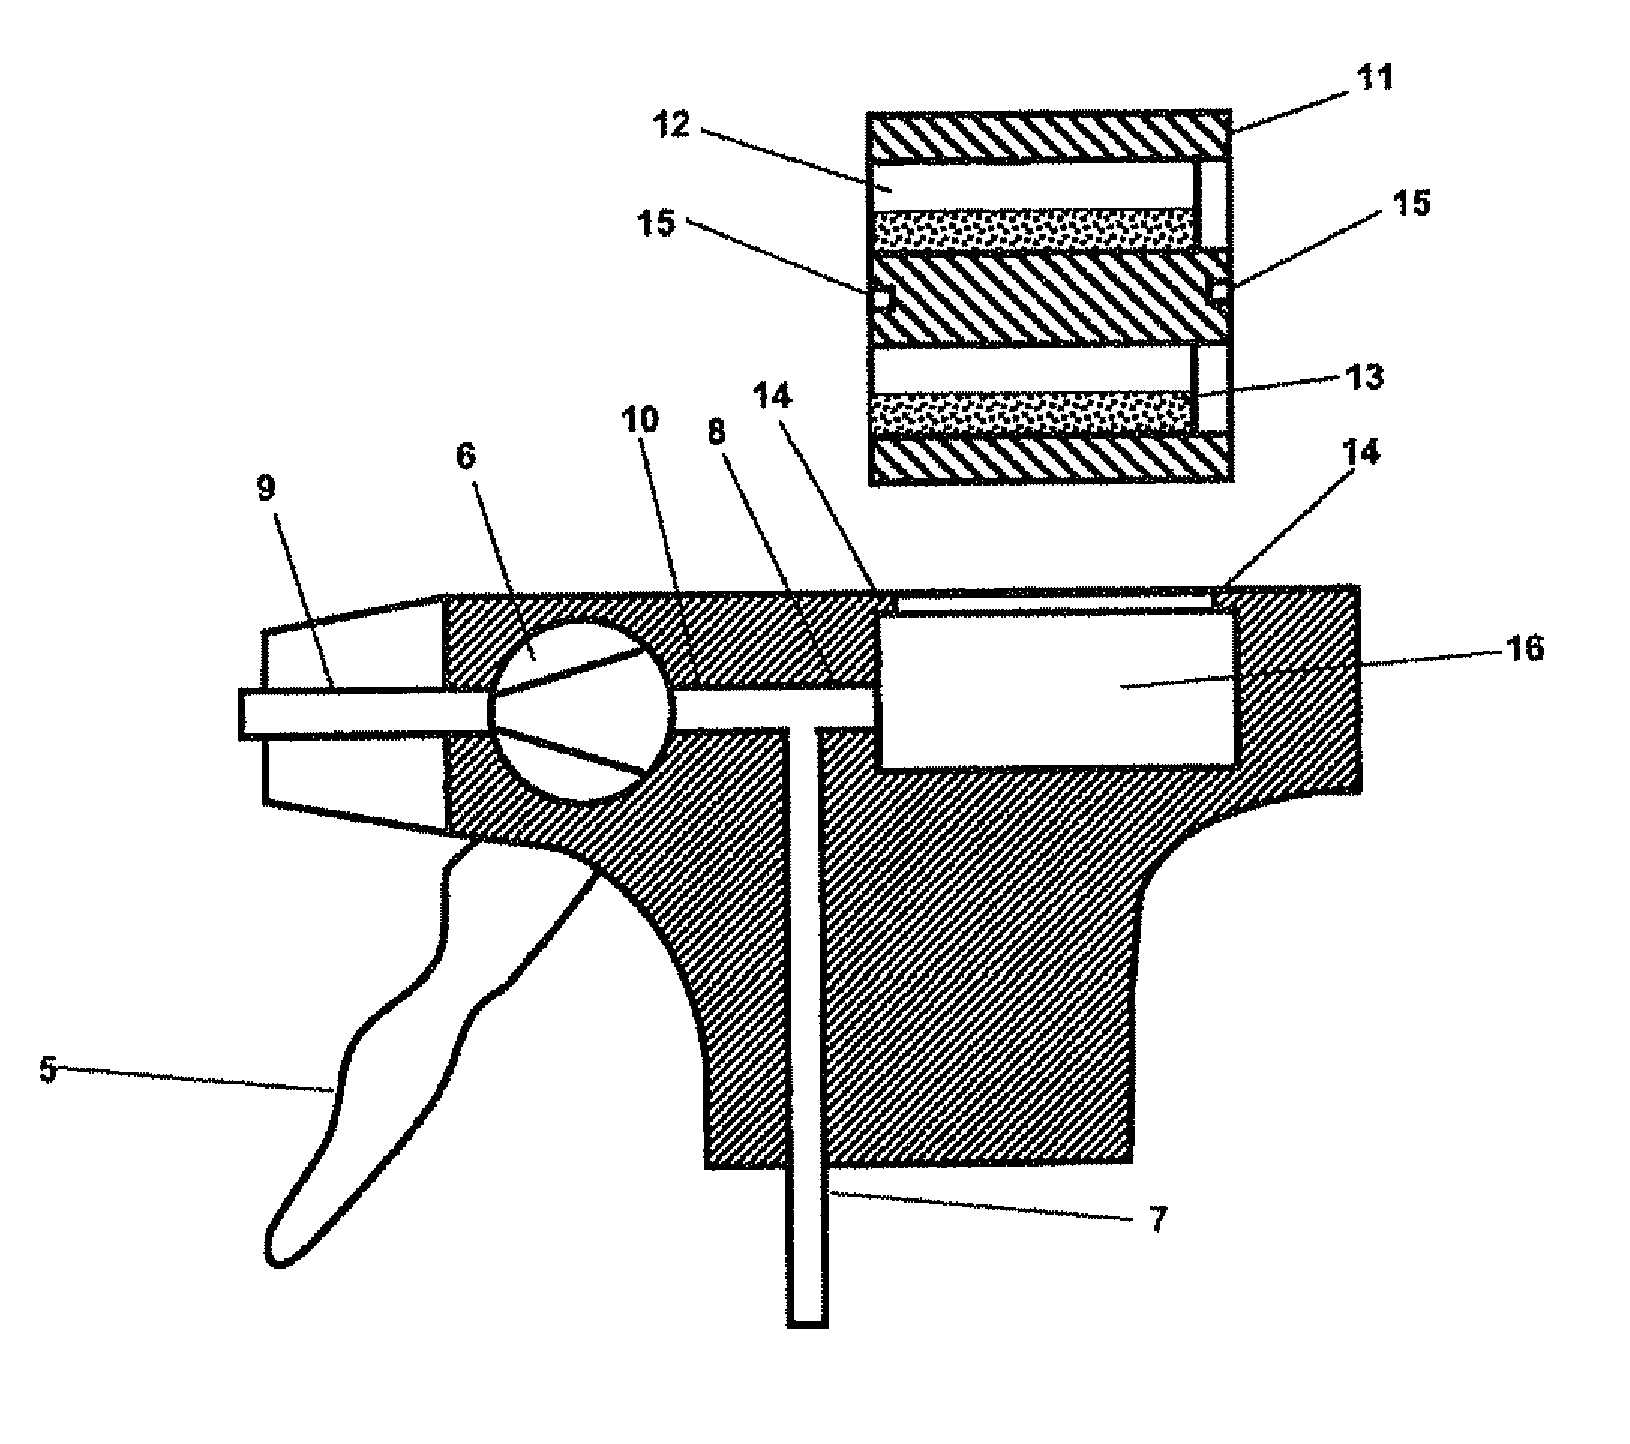 Dispensing device for dispensing a plurality of different preparations